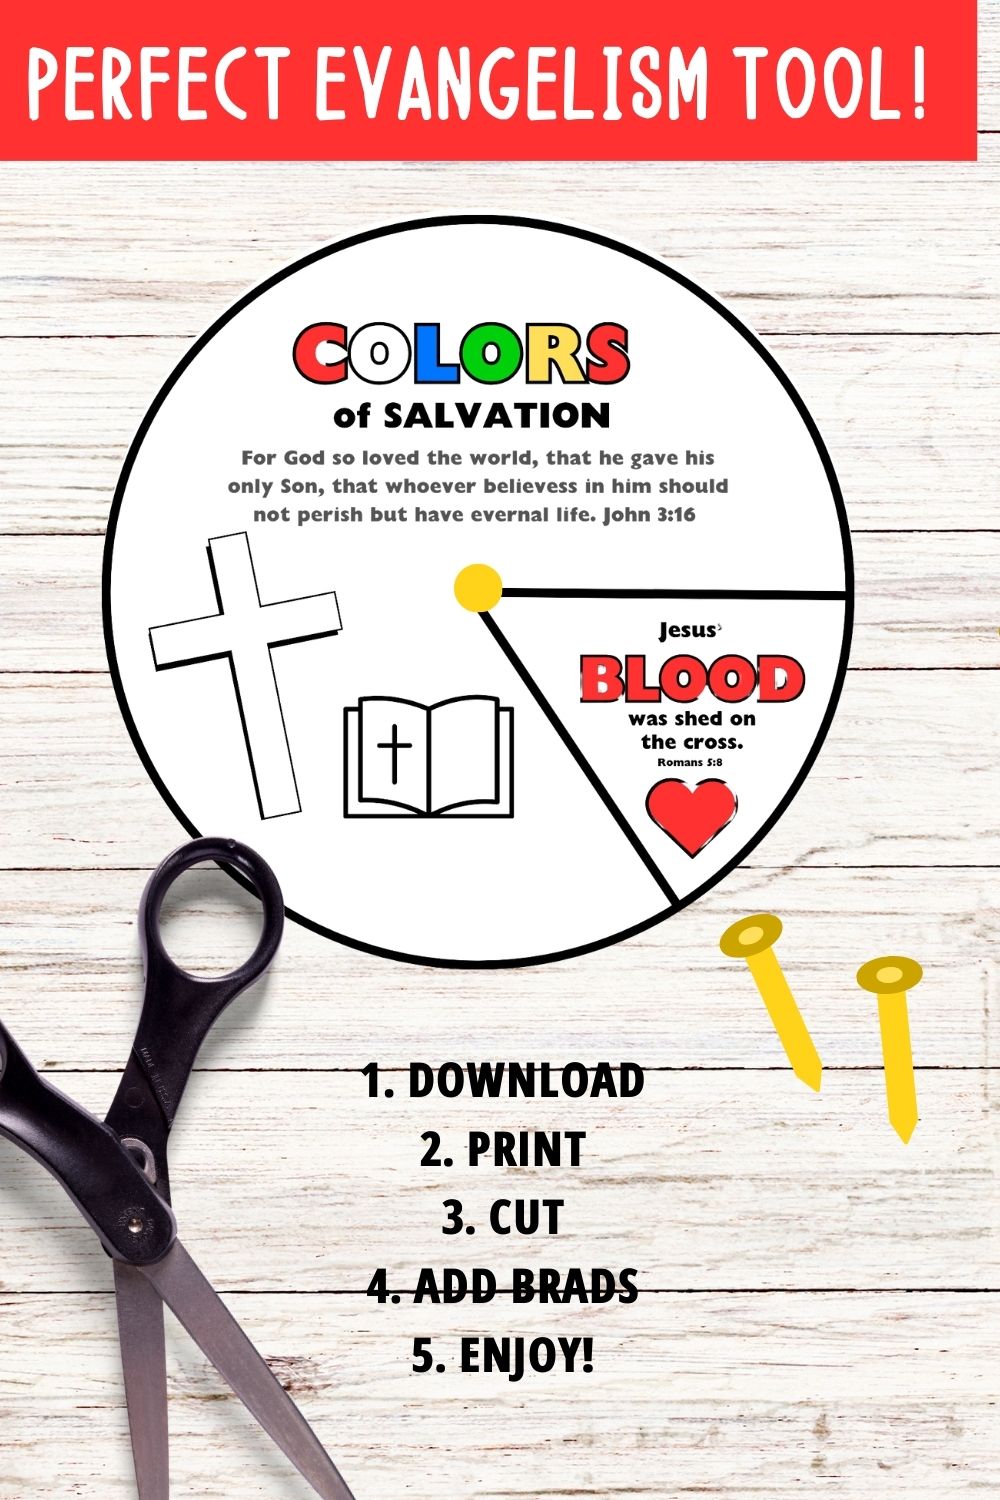 Colors of Salvation Spinner Wheel